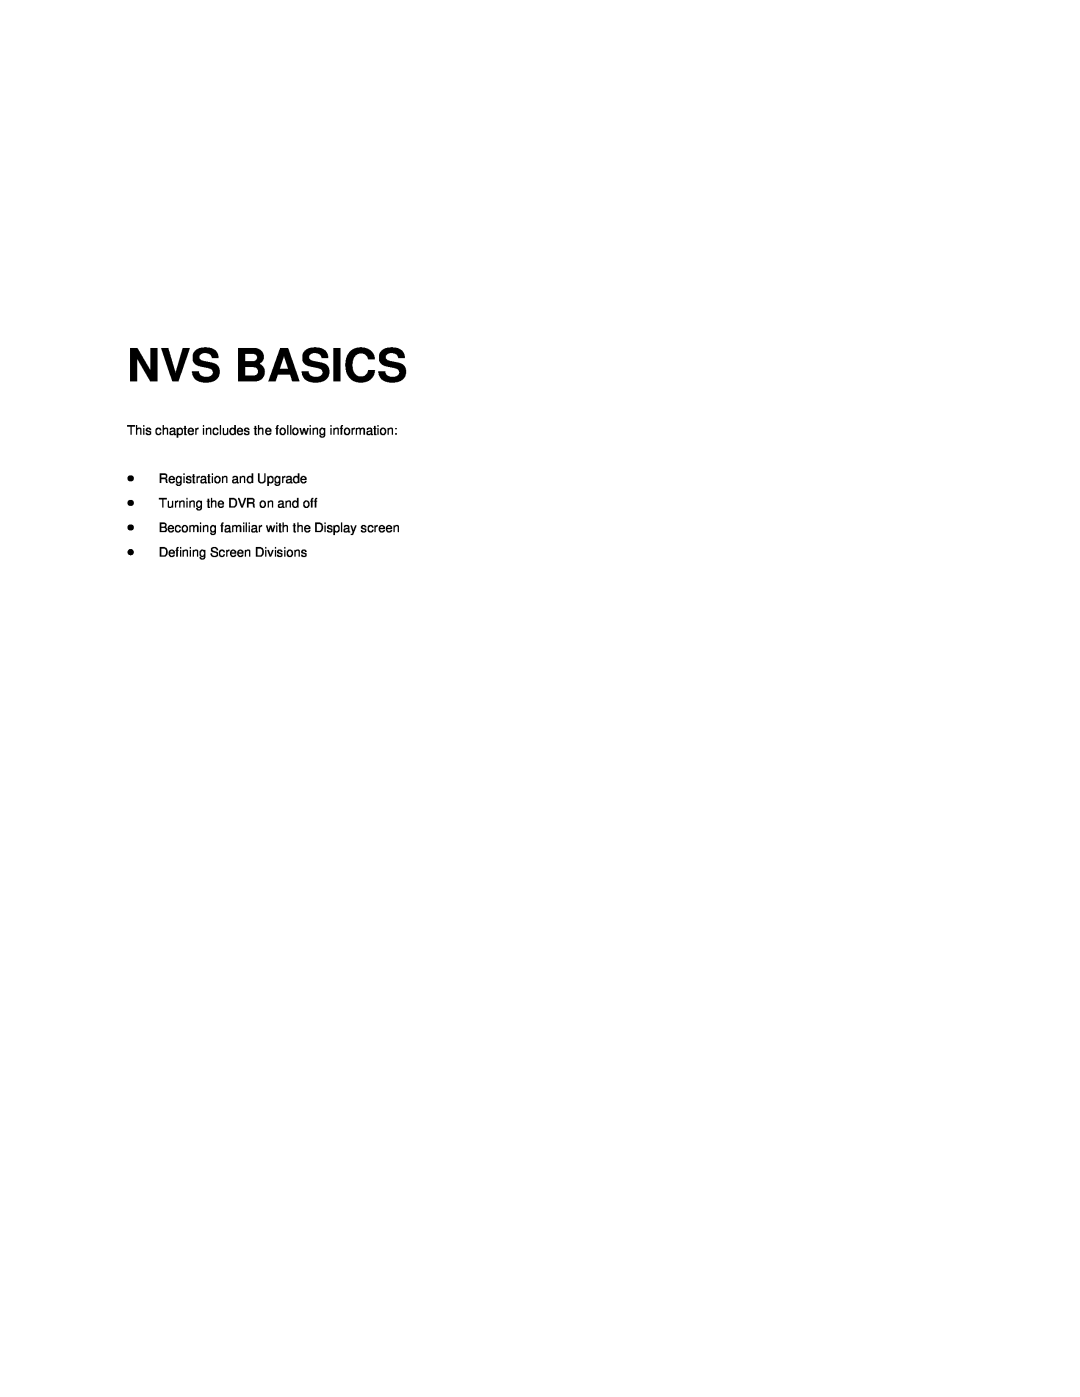 Toshiba NVS8-X, NVS32-X, NVS16-X user manual Nvs Basics, This chapter includes the following information 